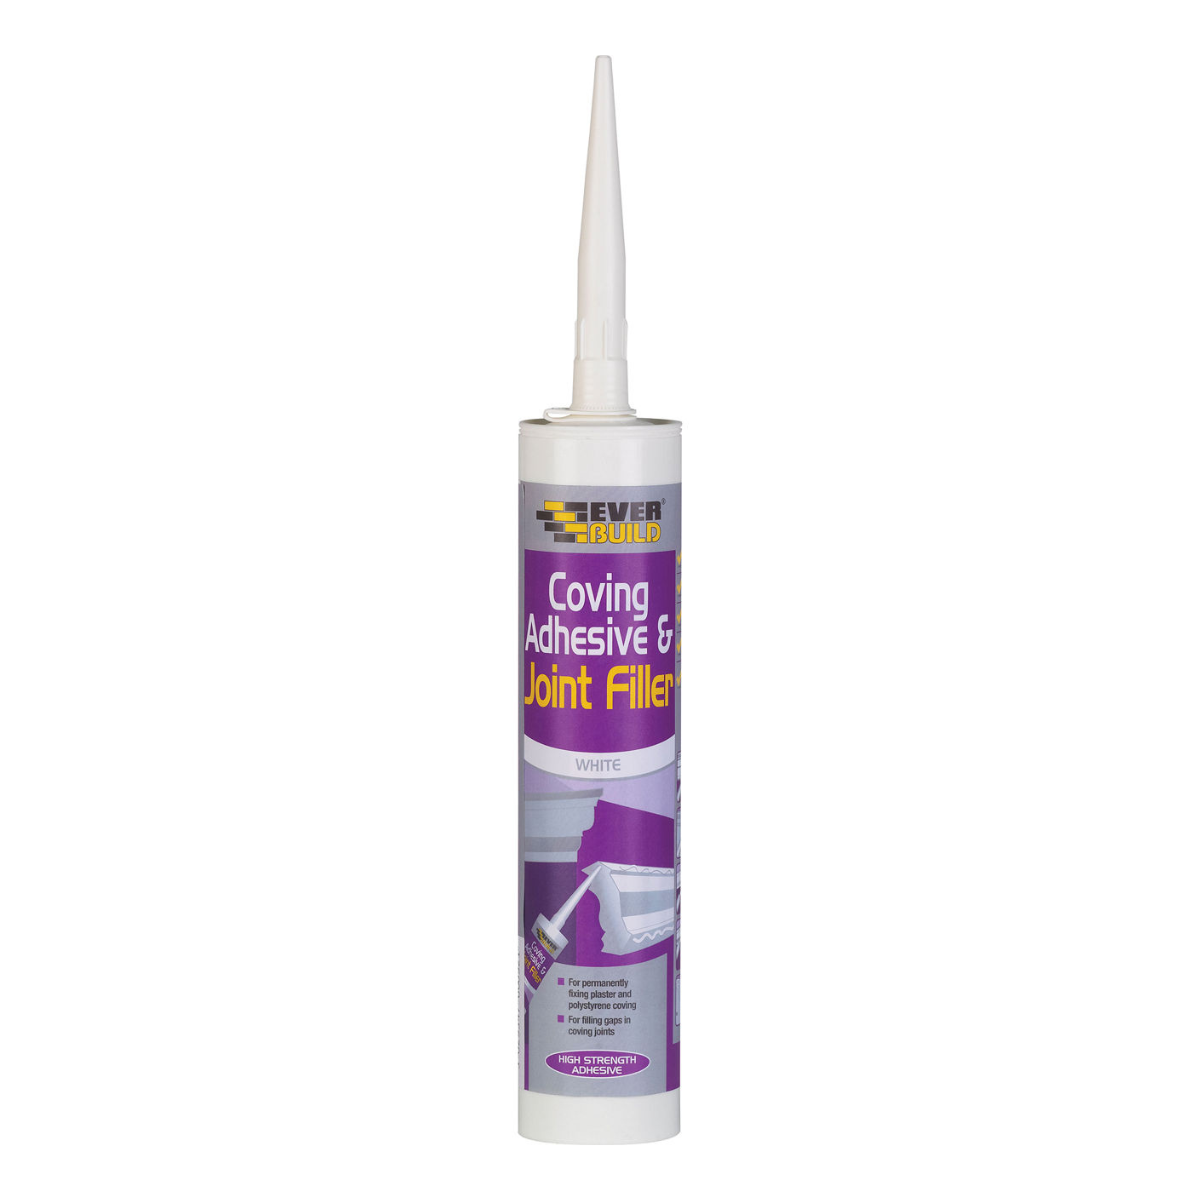 EVERBUILD Coving Adhesive & Joint Filler Polystyrene Plaster Joints Cornice